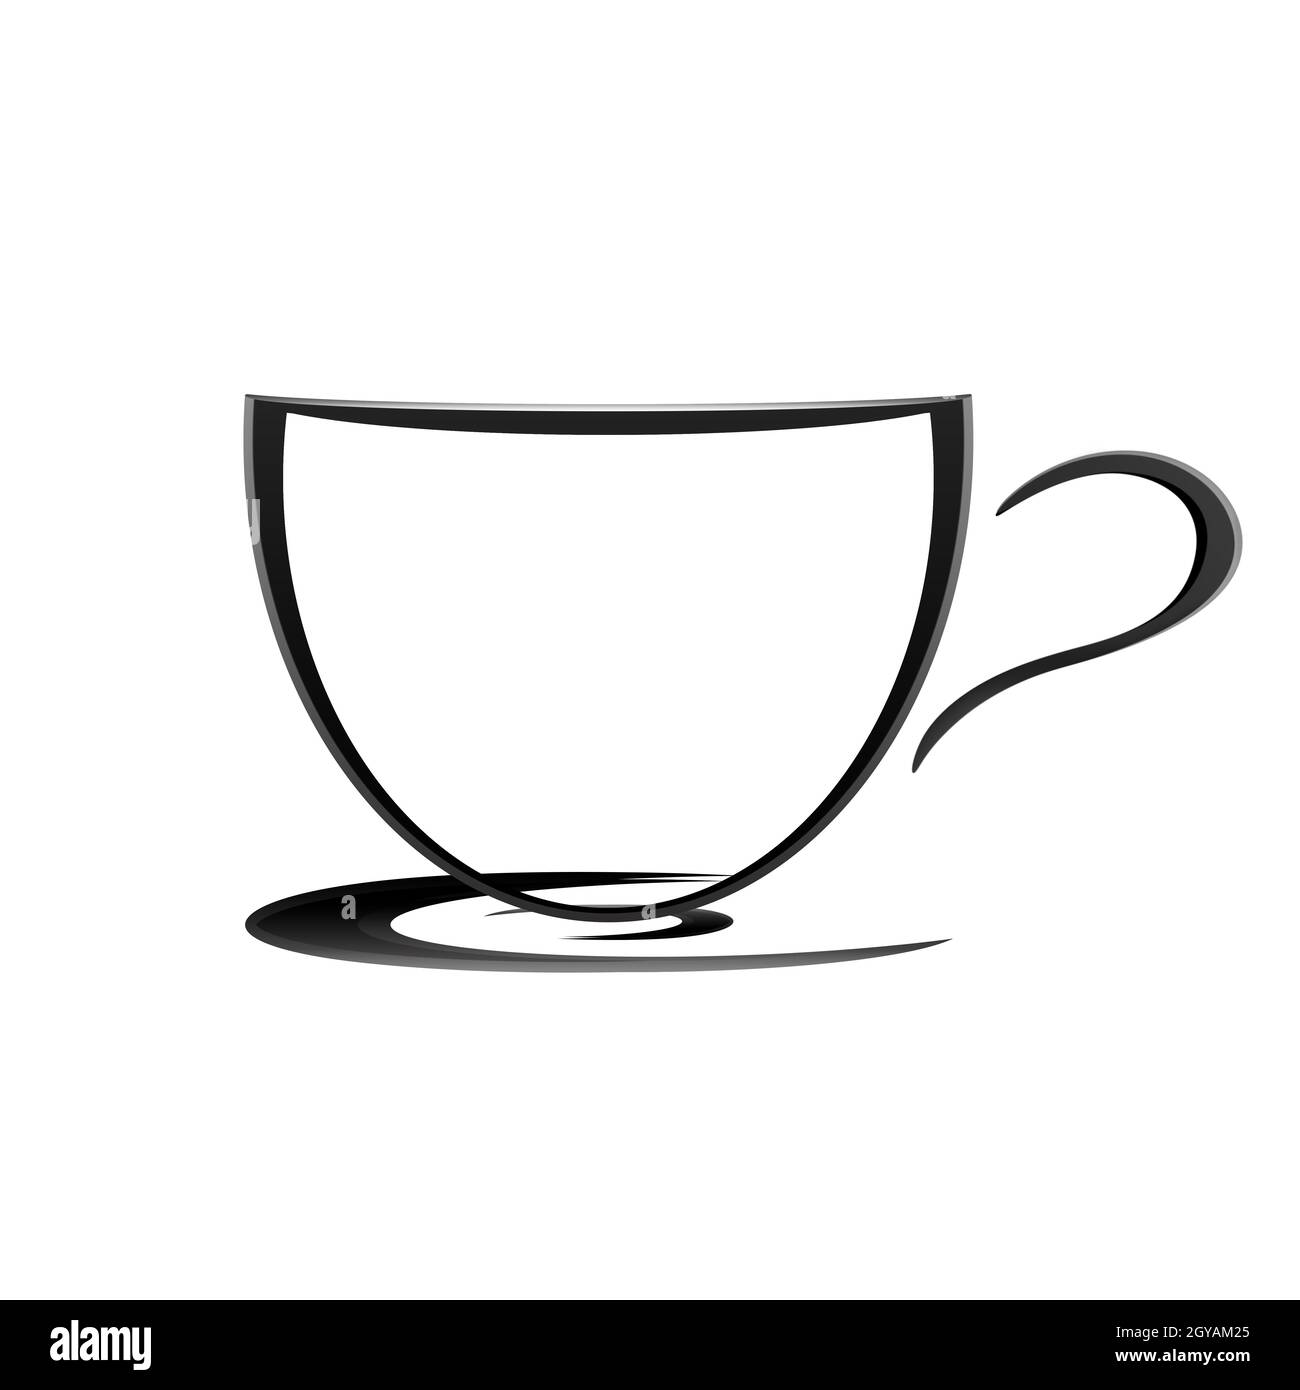 Coffee cup isolated on white background illustration Stock Photo